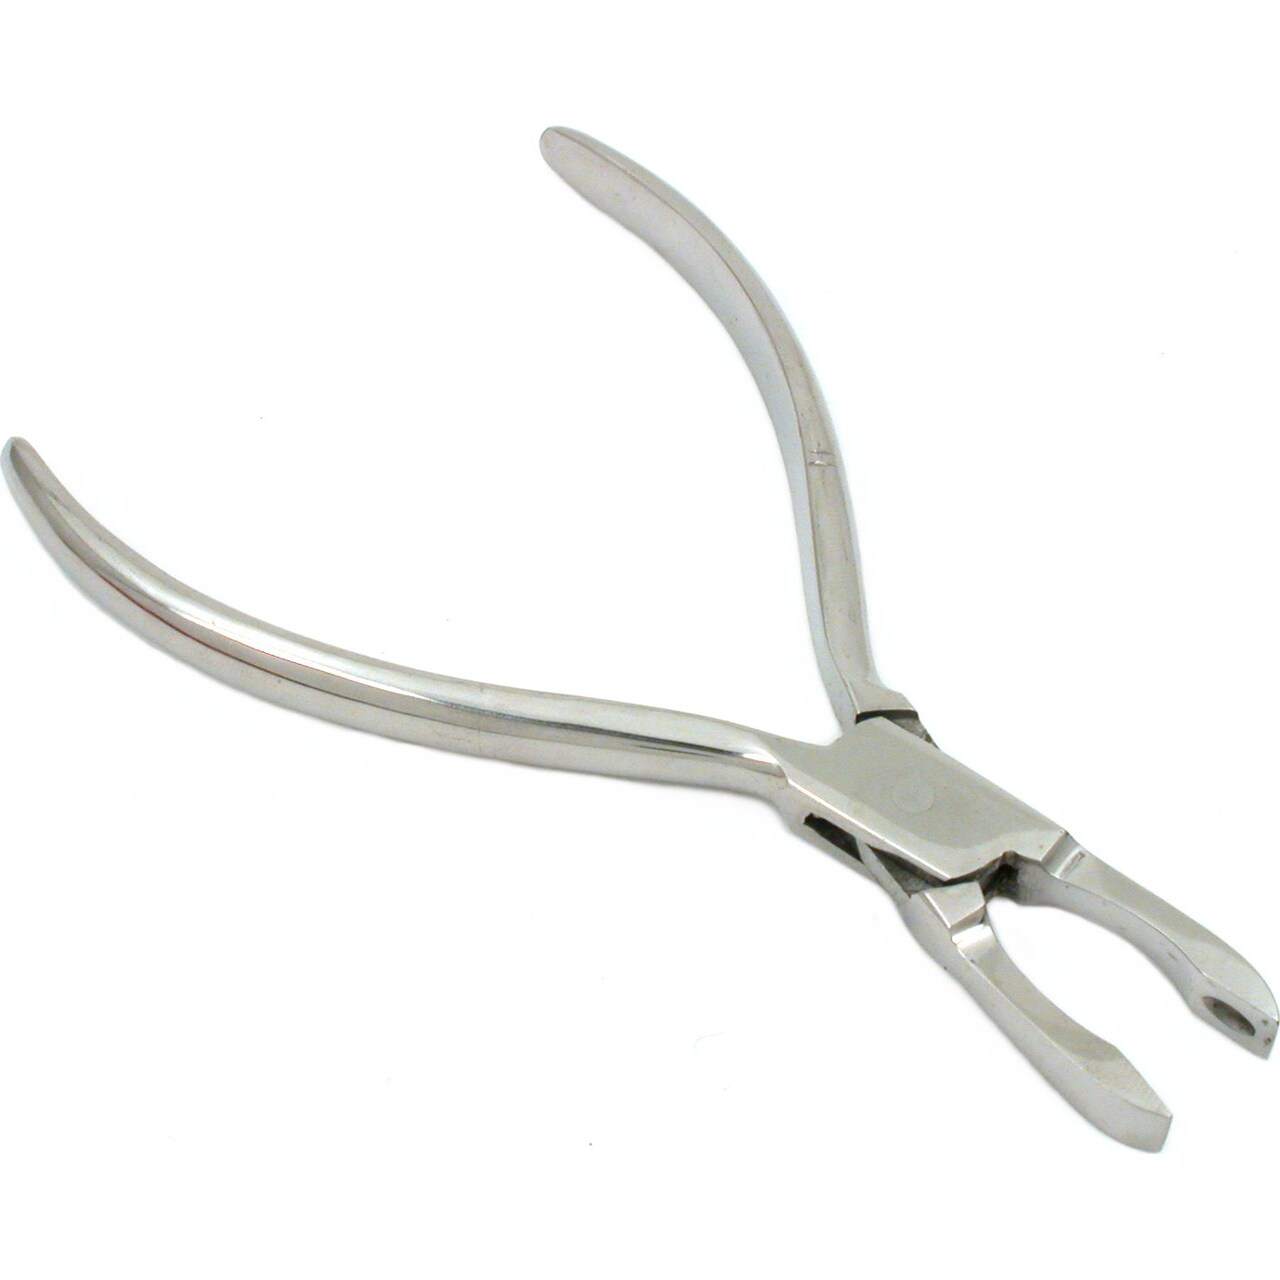 Loop Closing Pliers for Jewelry Making Wire Forming, Jump Rings and Bead  Work A1